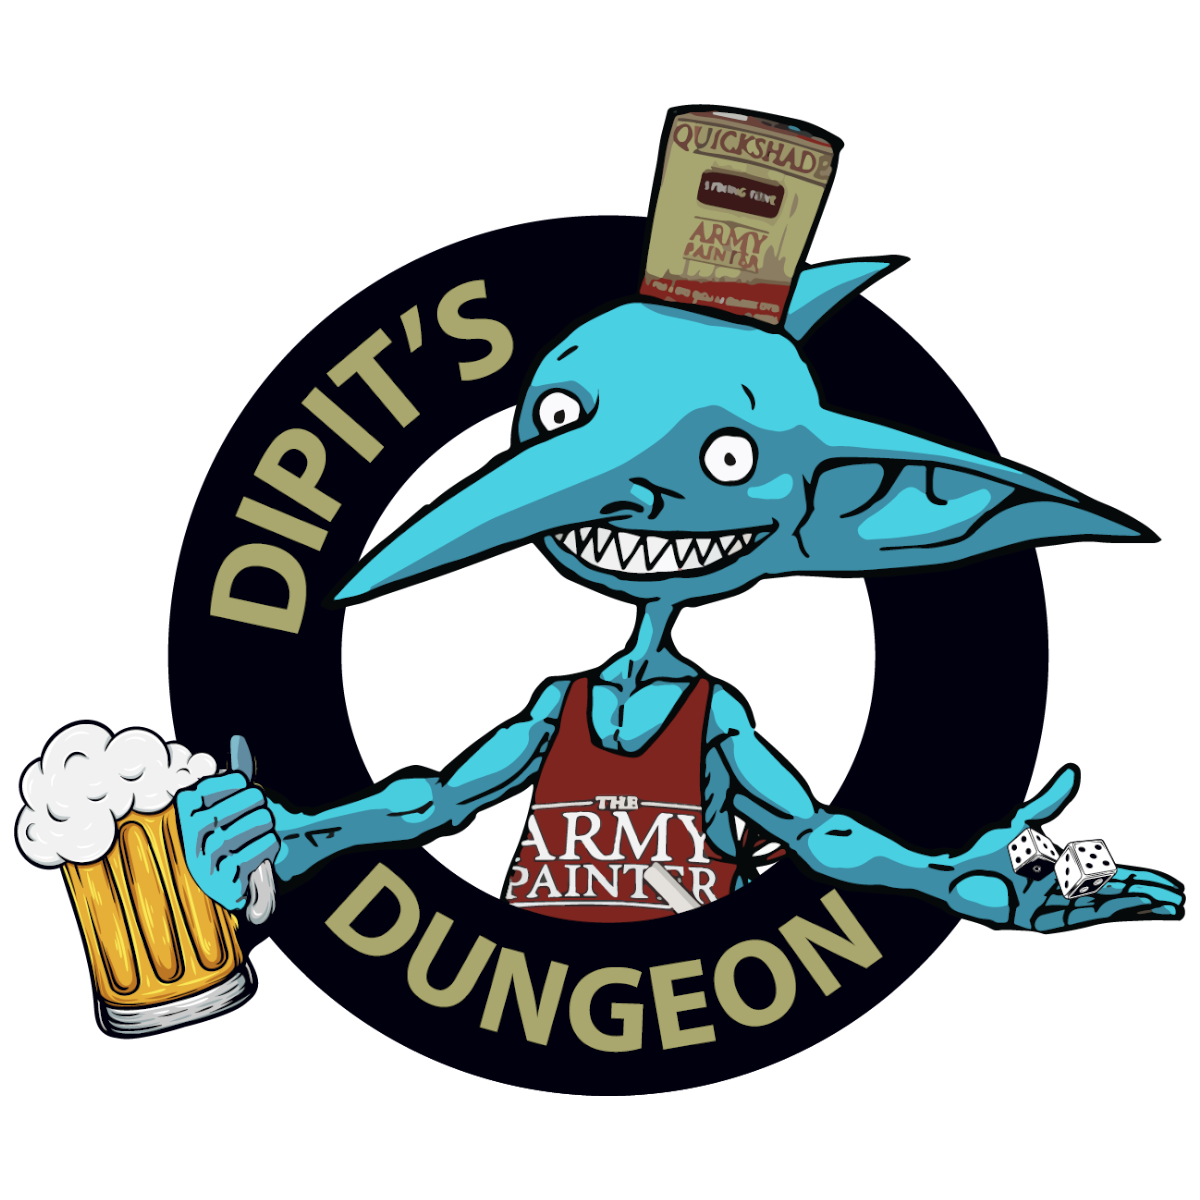 DipIt’s Dungeon Revealed